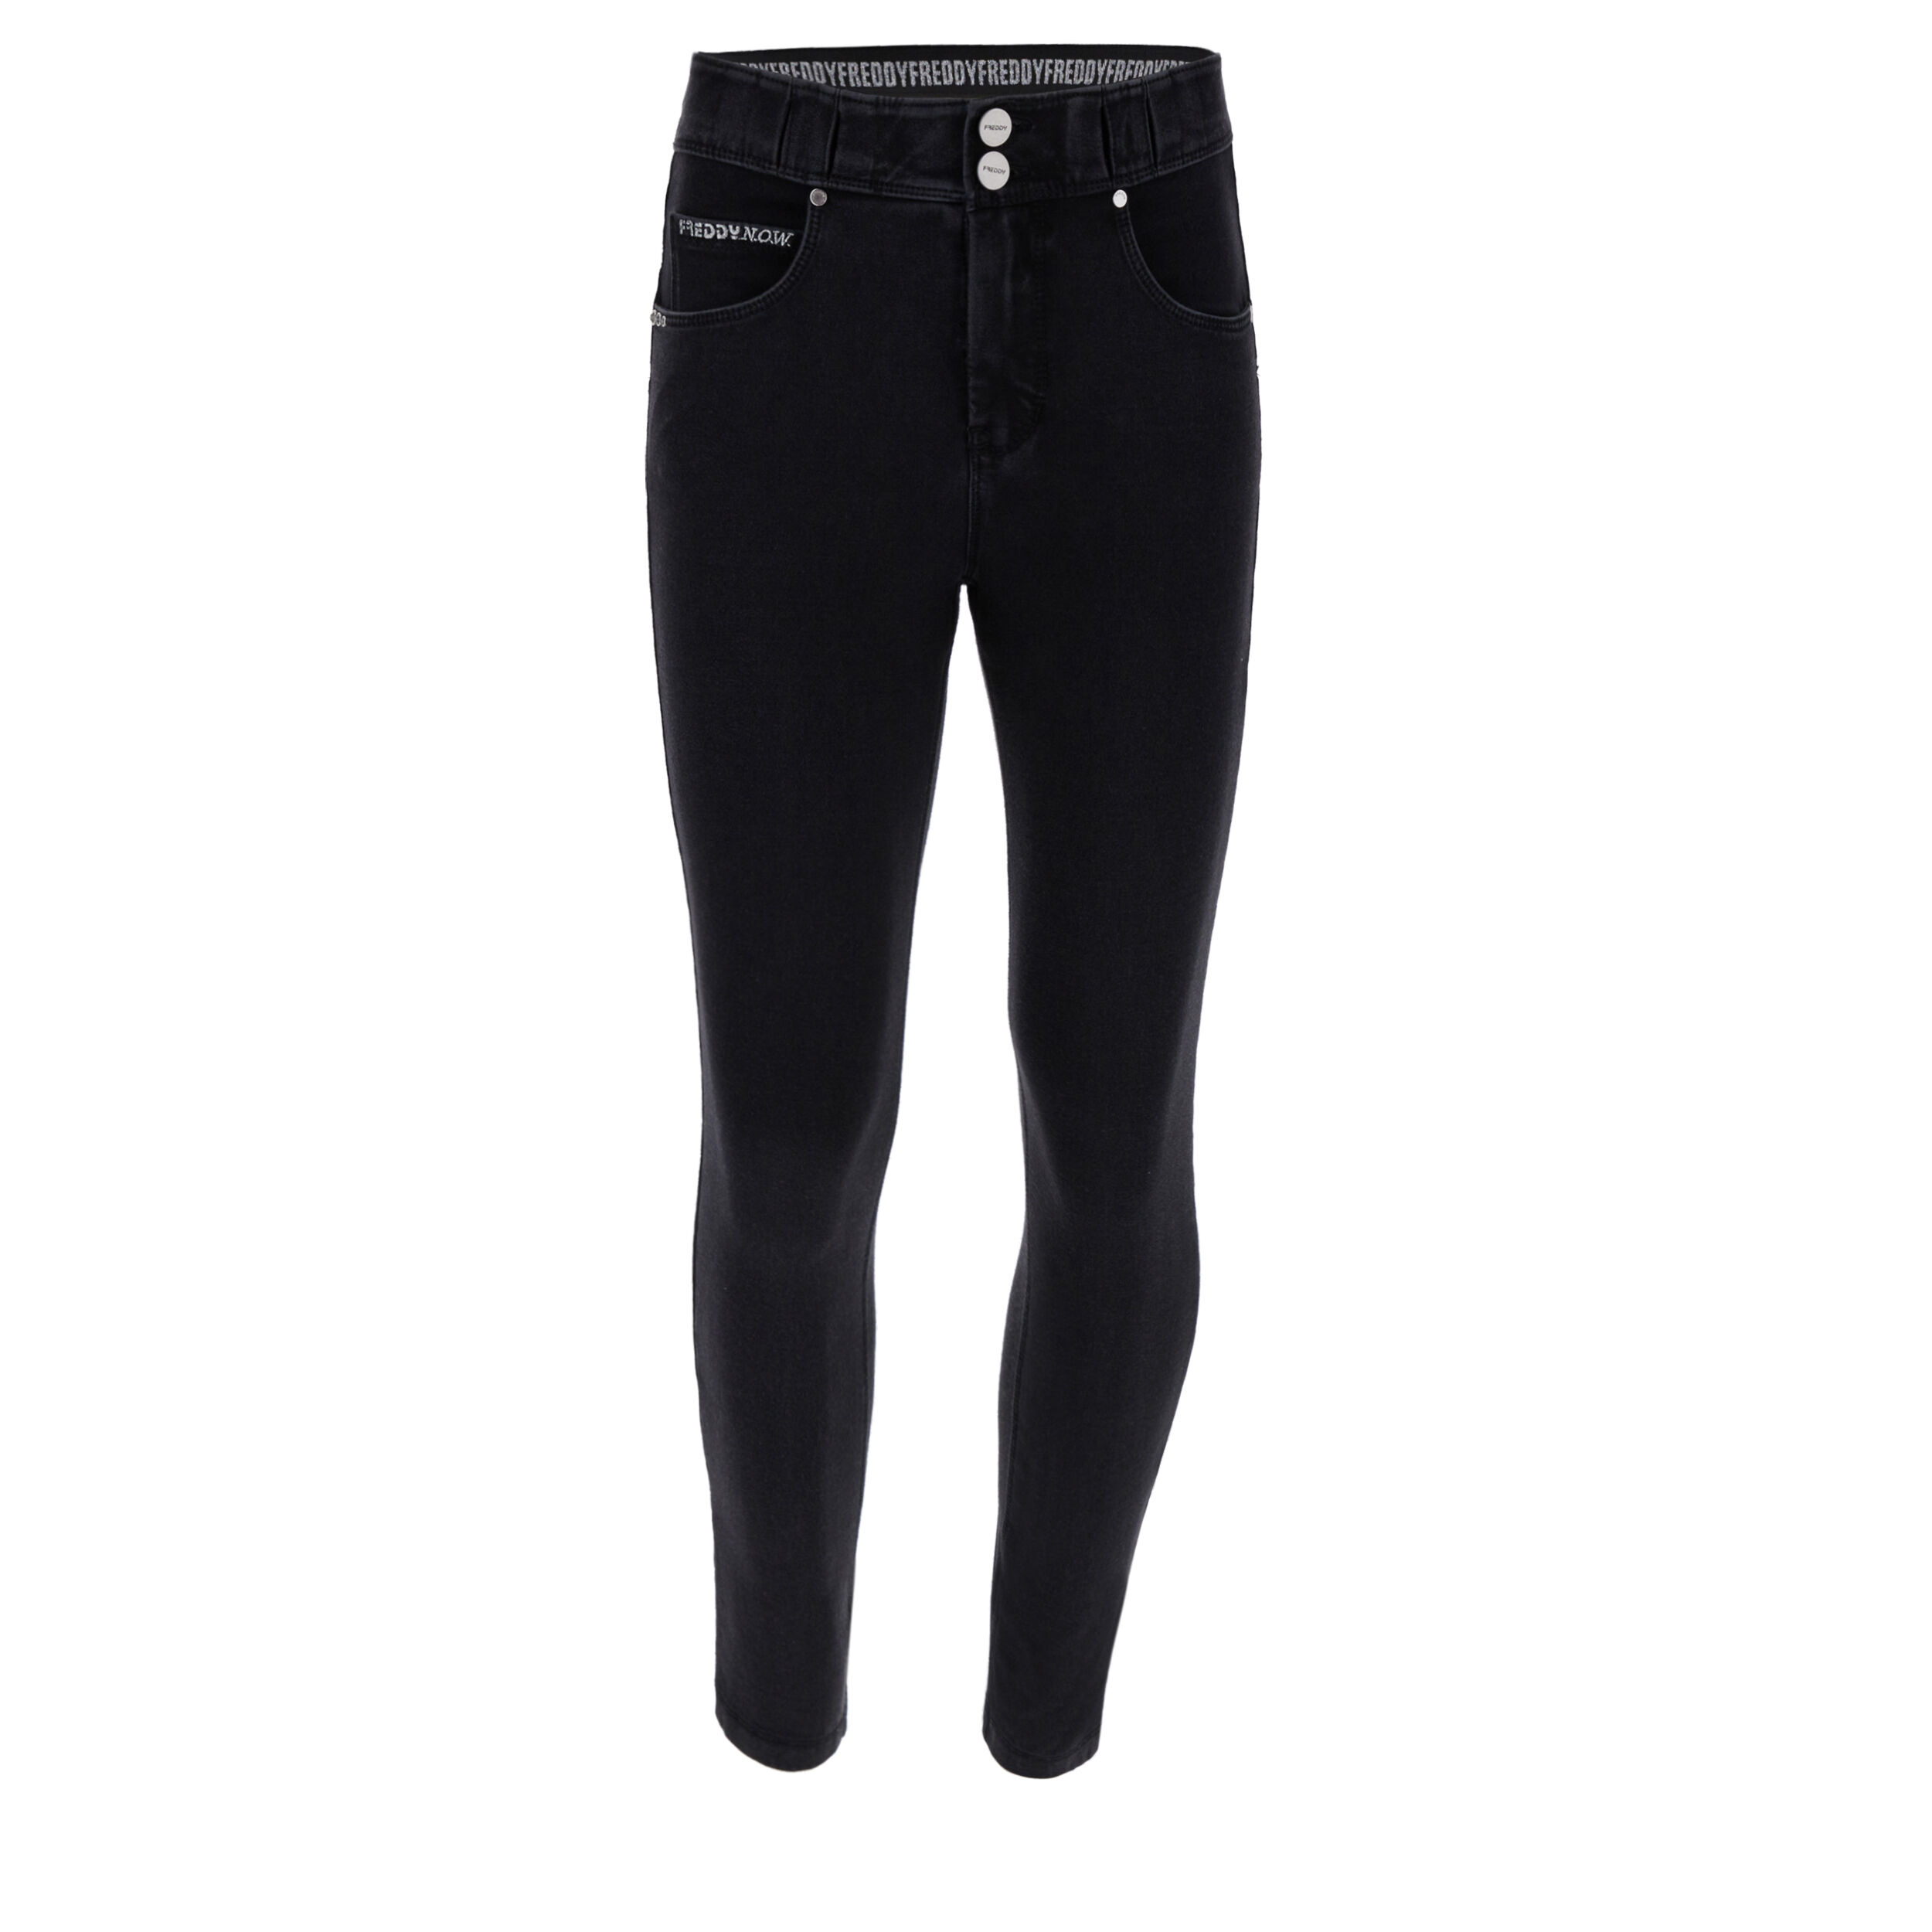 Freddy Pantaloni N.O.W.® superskinny vita media in jersey eco Jeans Nero-Cuciture In Tono Donna Extra Large